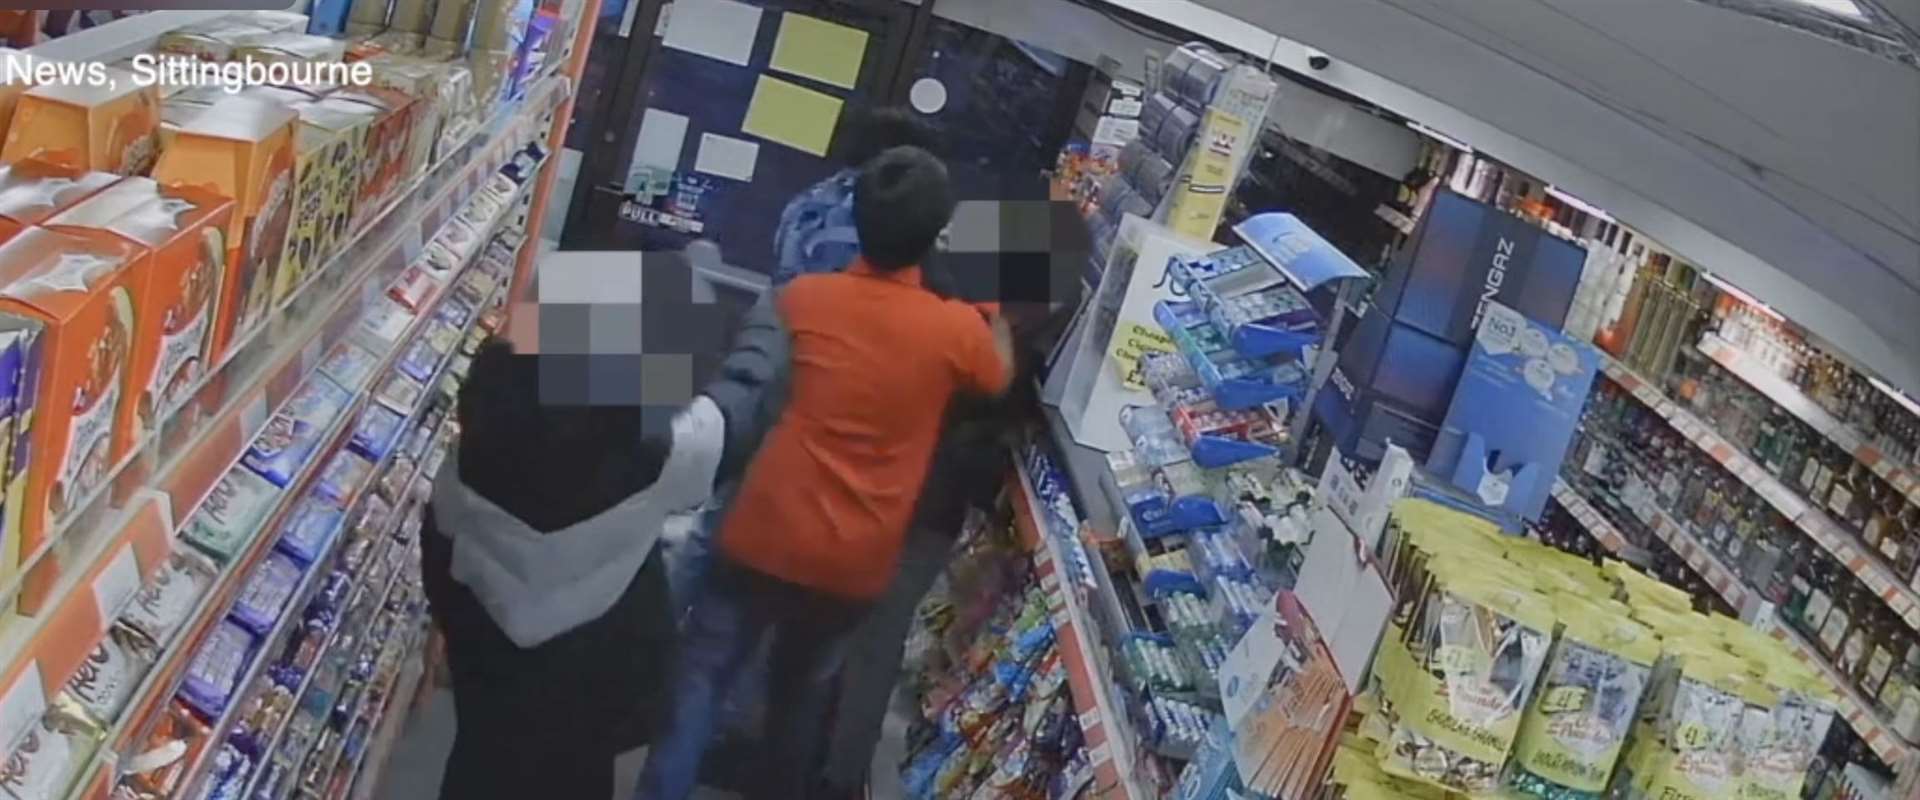 Two youngsters were caught on camera in an altercation with a shop assistant at East Street News, Sittingbourne. Picture: East Street News